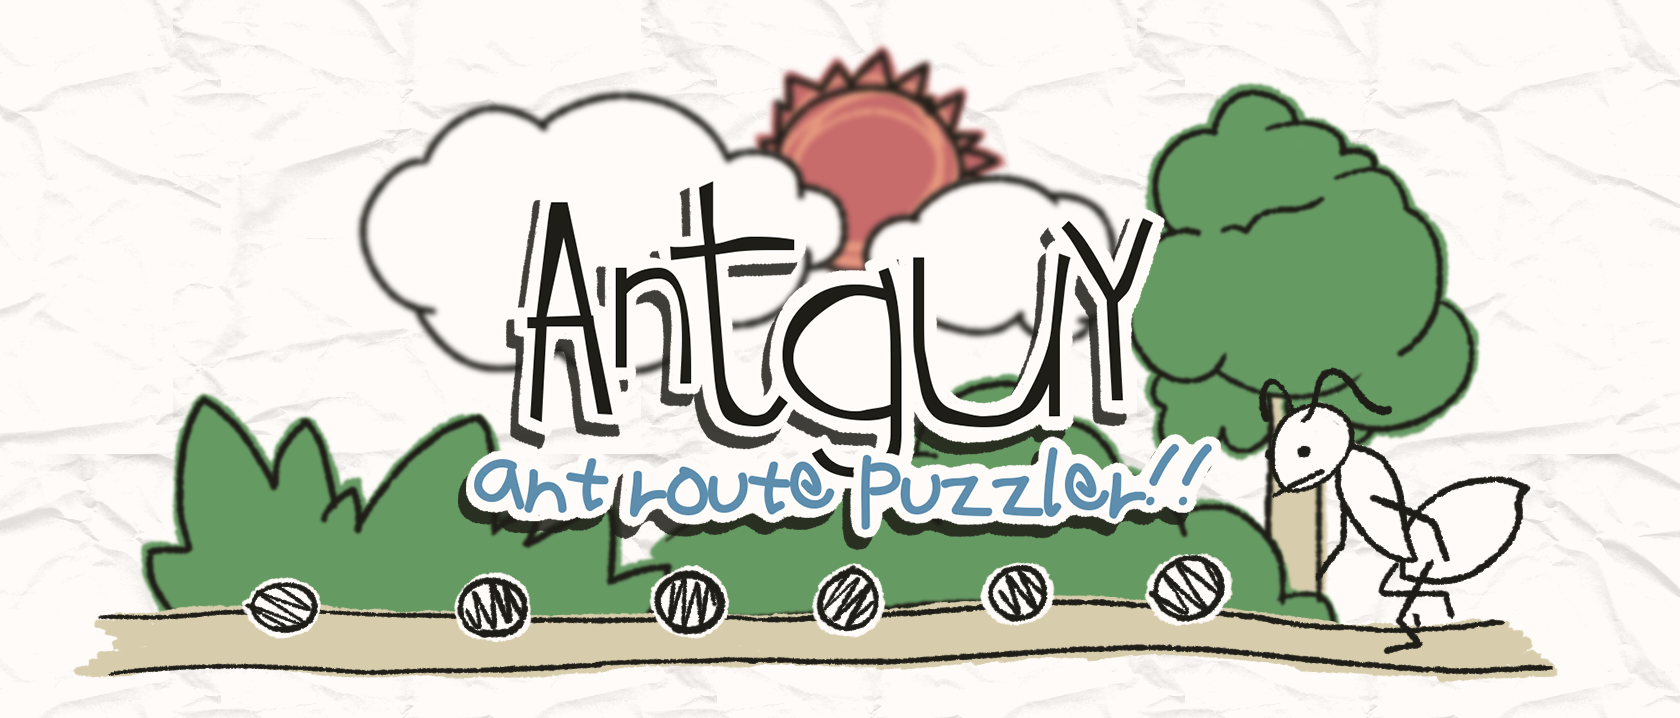 Antguy -ant route puzzler!!-